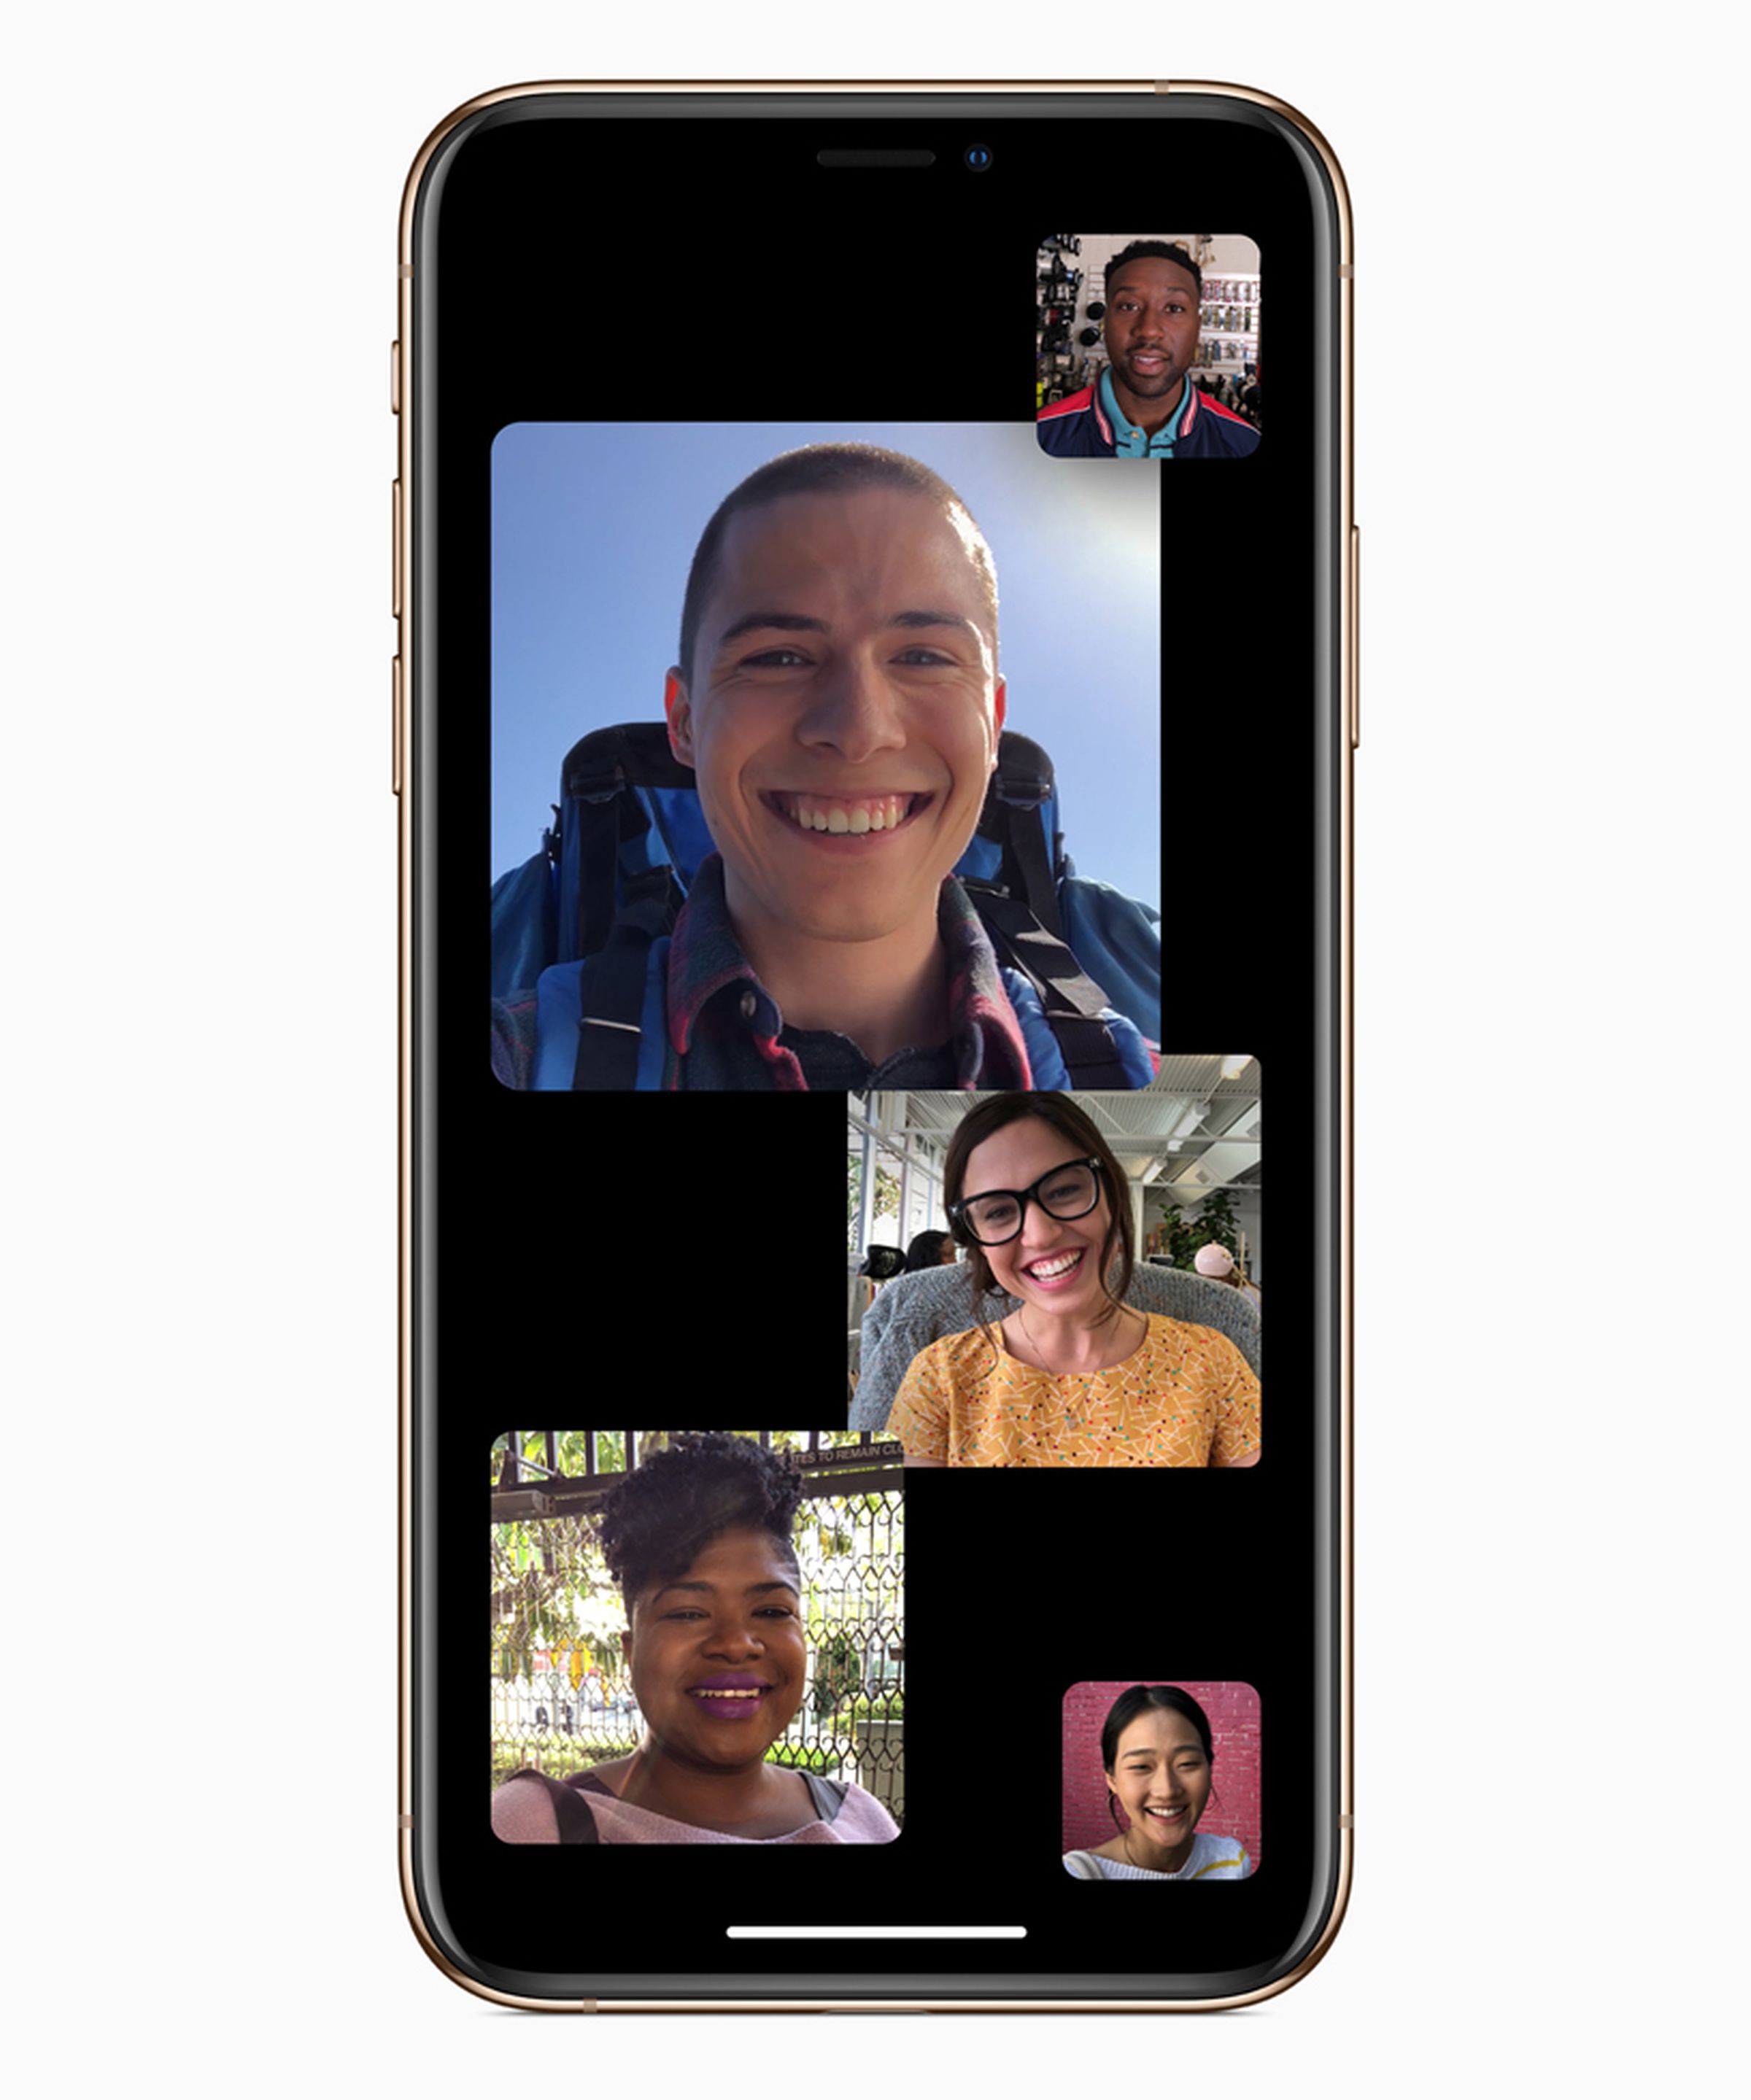 Group FaceTime and dual-SIM support are the biggest new features of iOS 12.1.